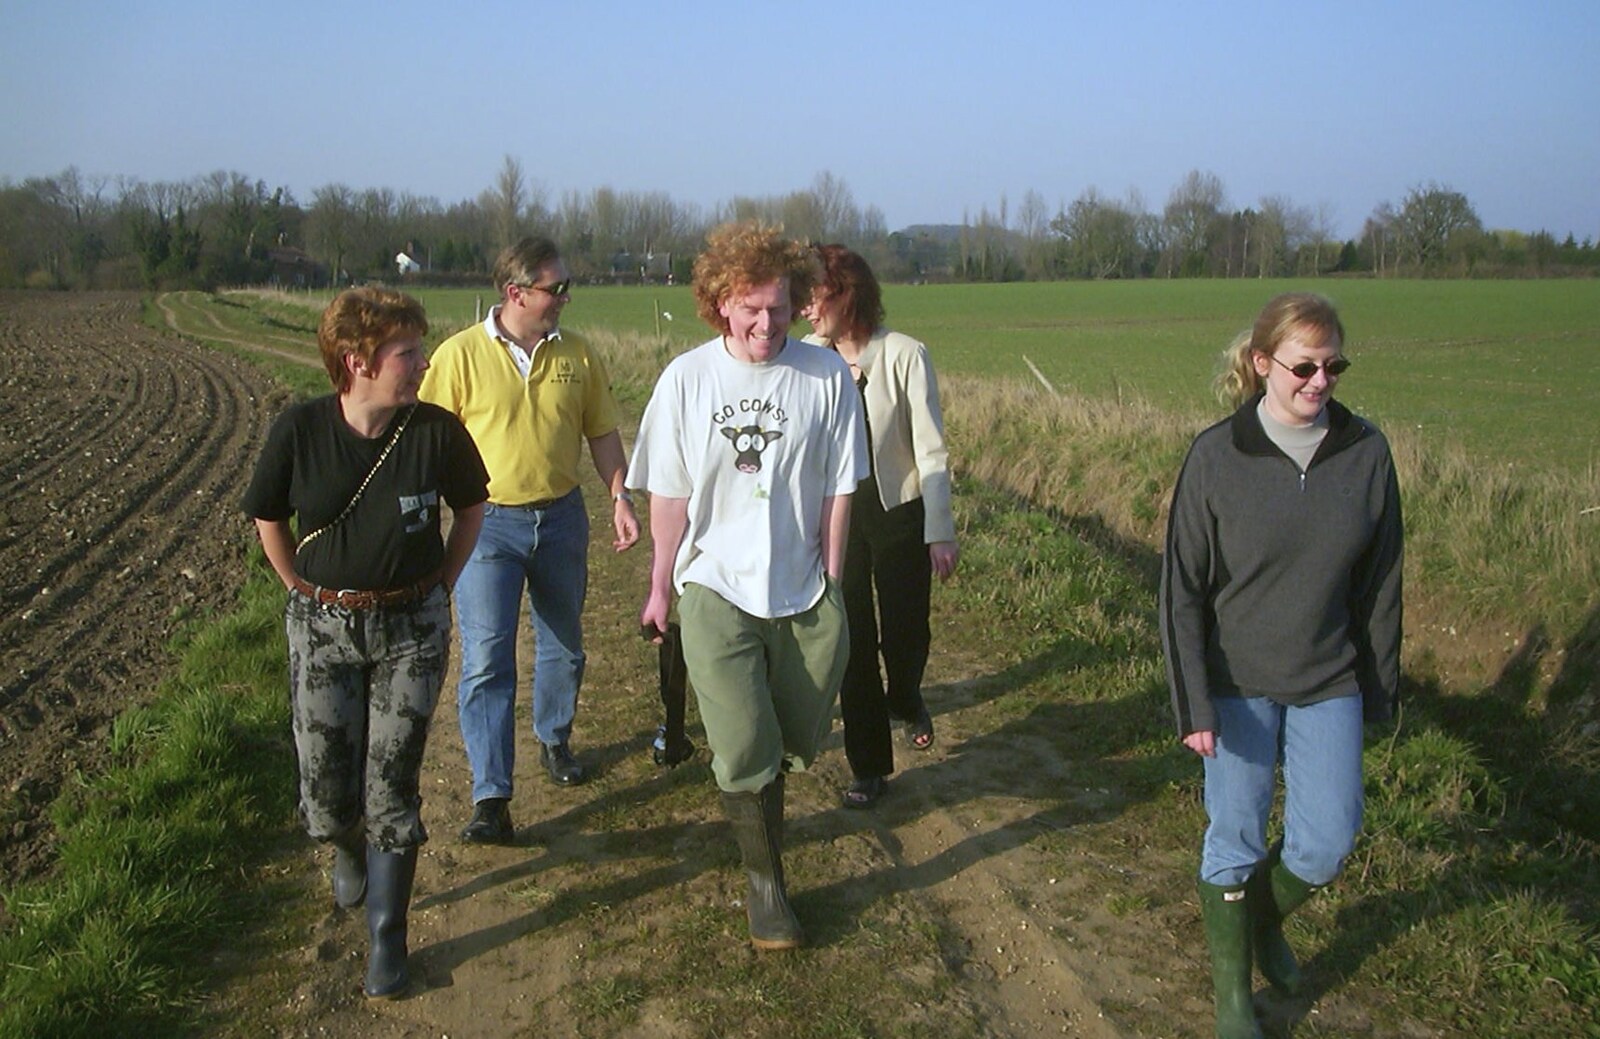 More walking the lanes from Carolyn on Sunday, Wymondham, Norfolk - 23rd March 2003